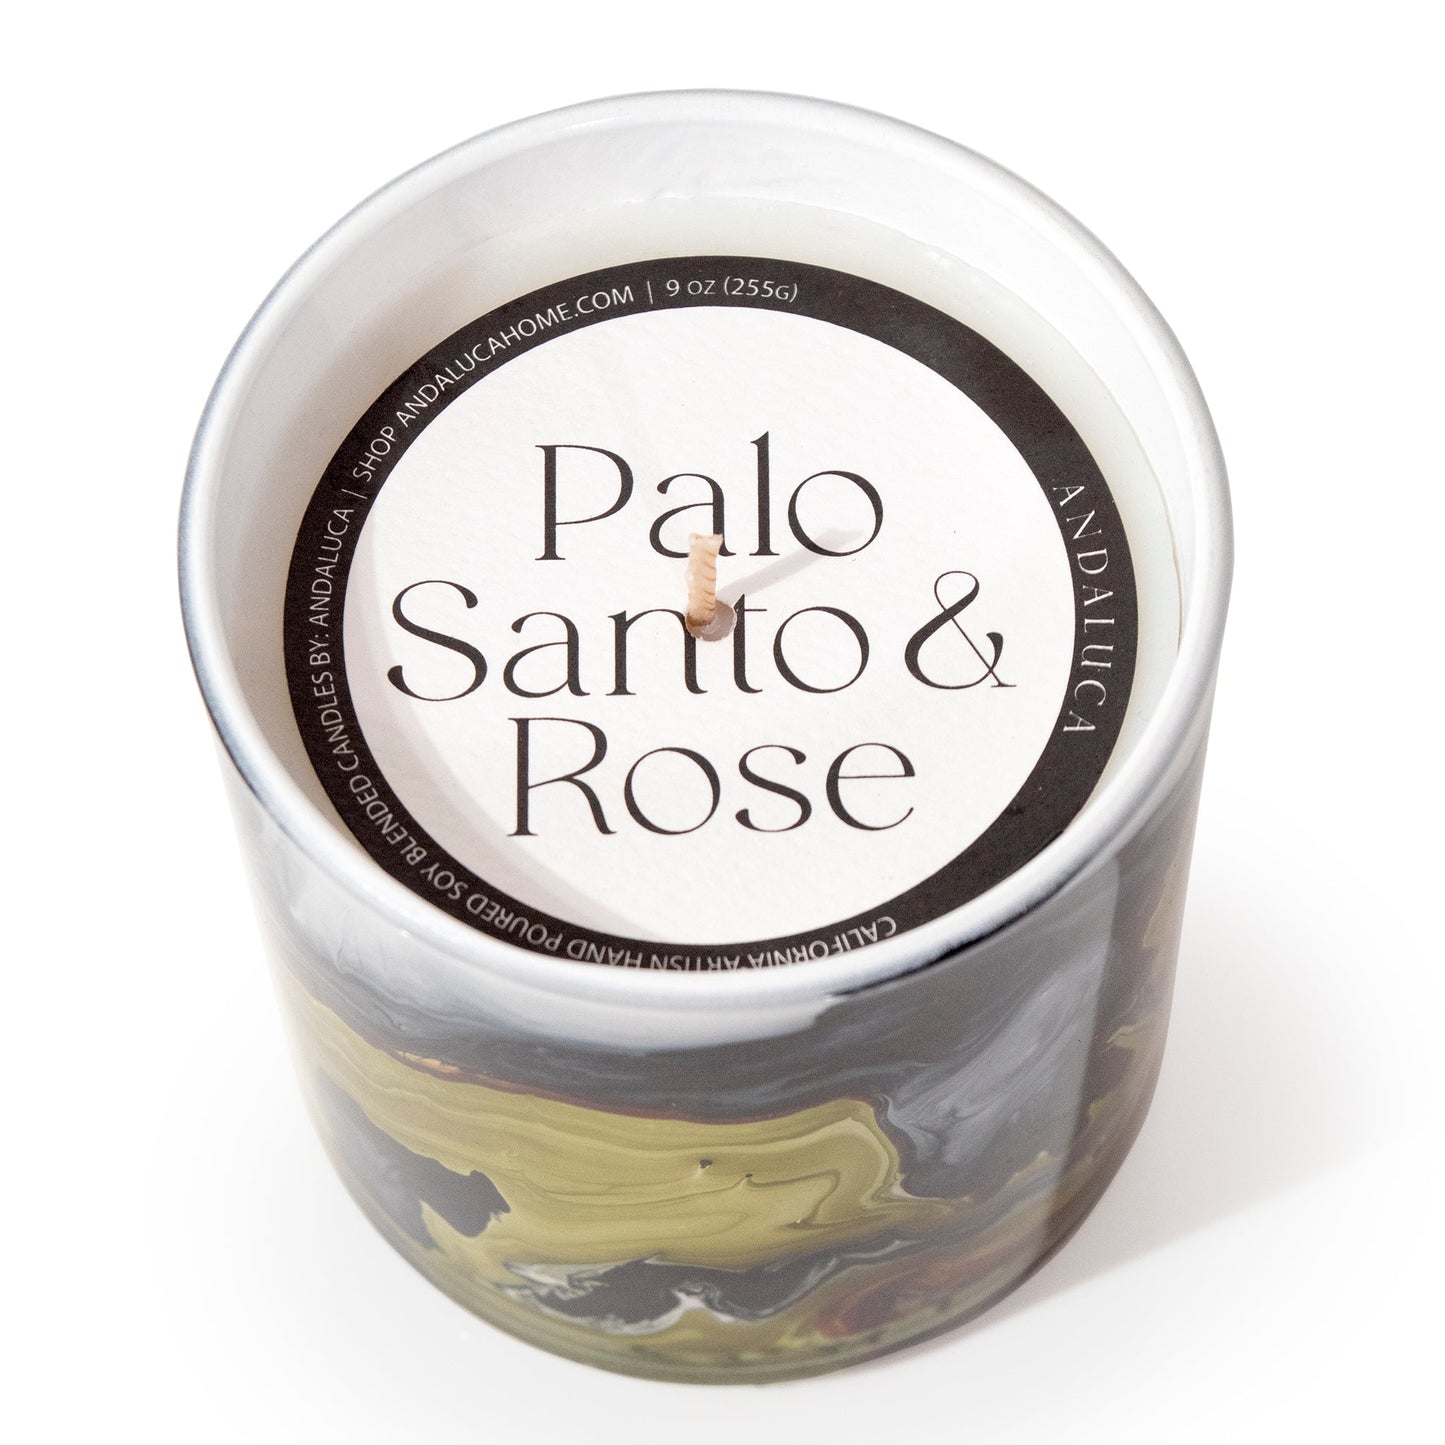 Palo Santo & Rose 9 oz. Swirl Glass Candle by Andaluca Home